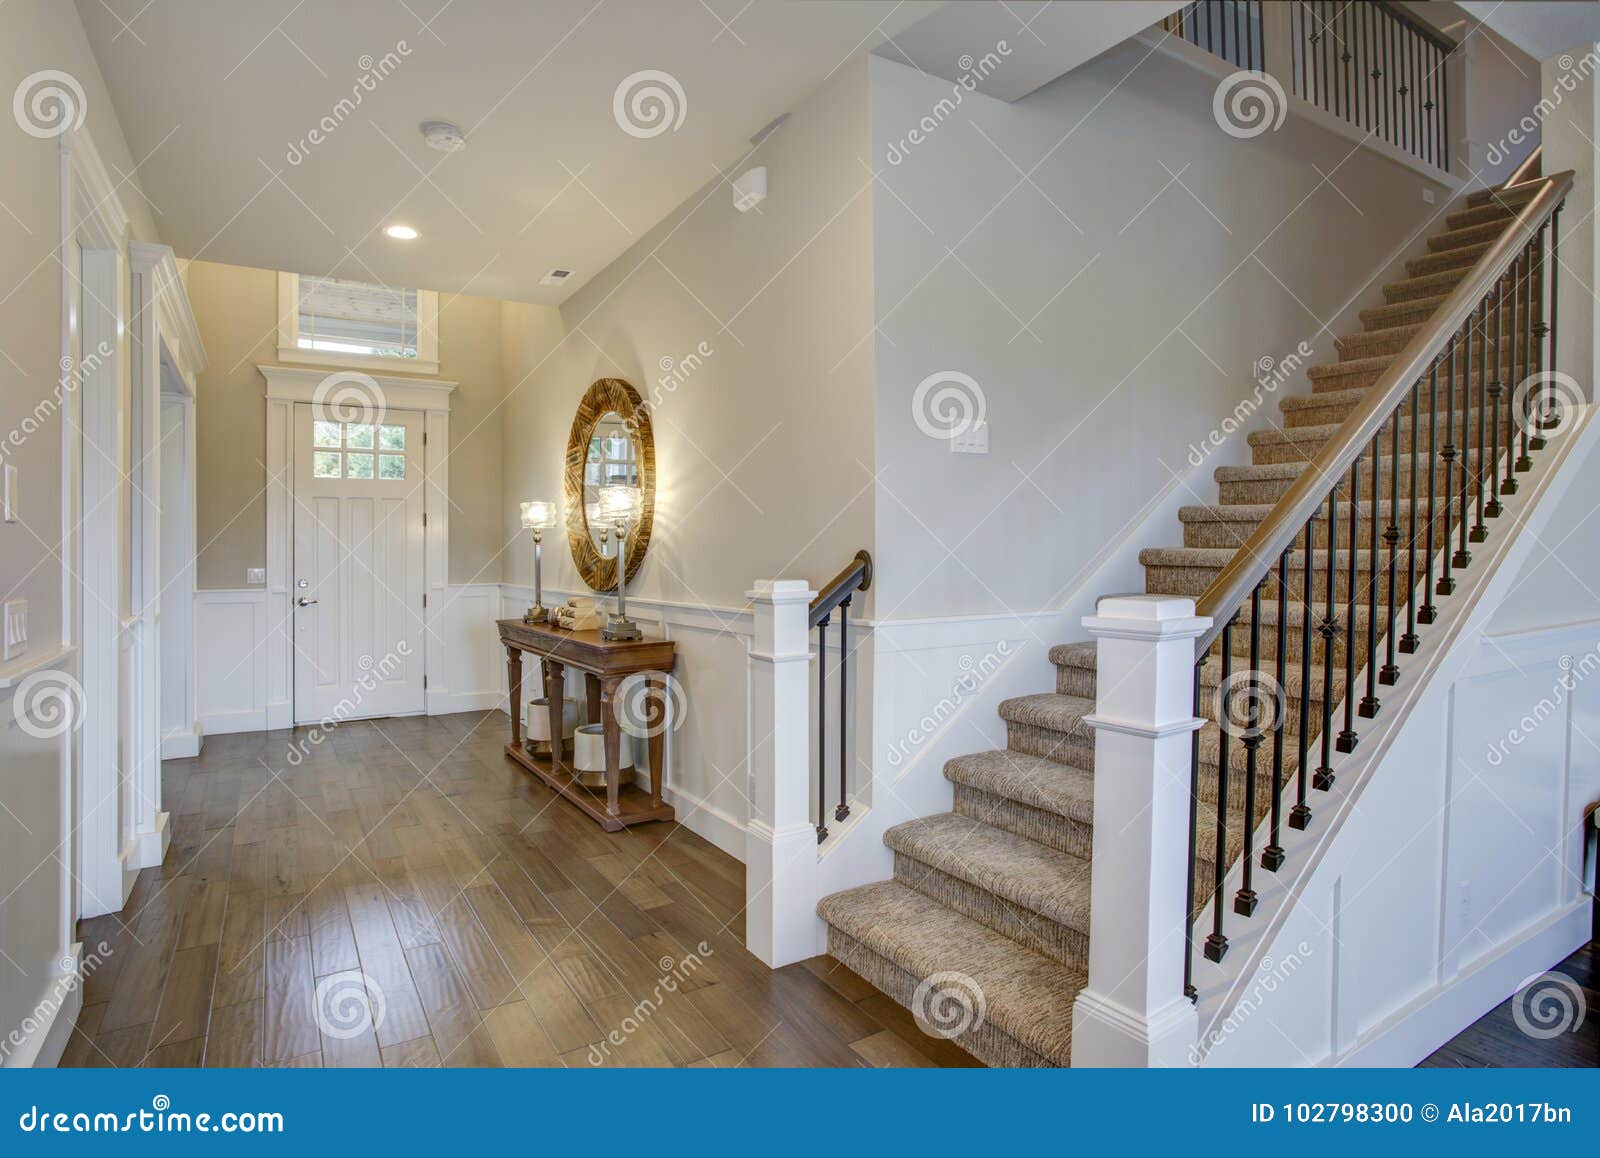 fabulous foyer features a staircase